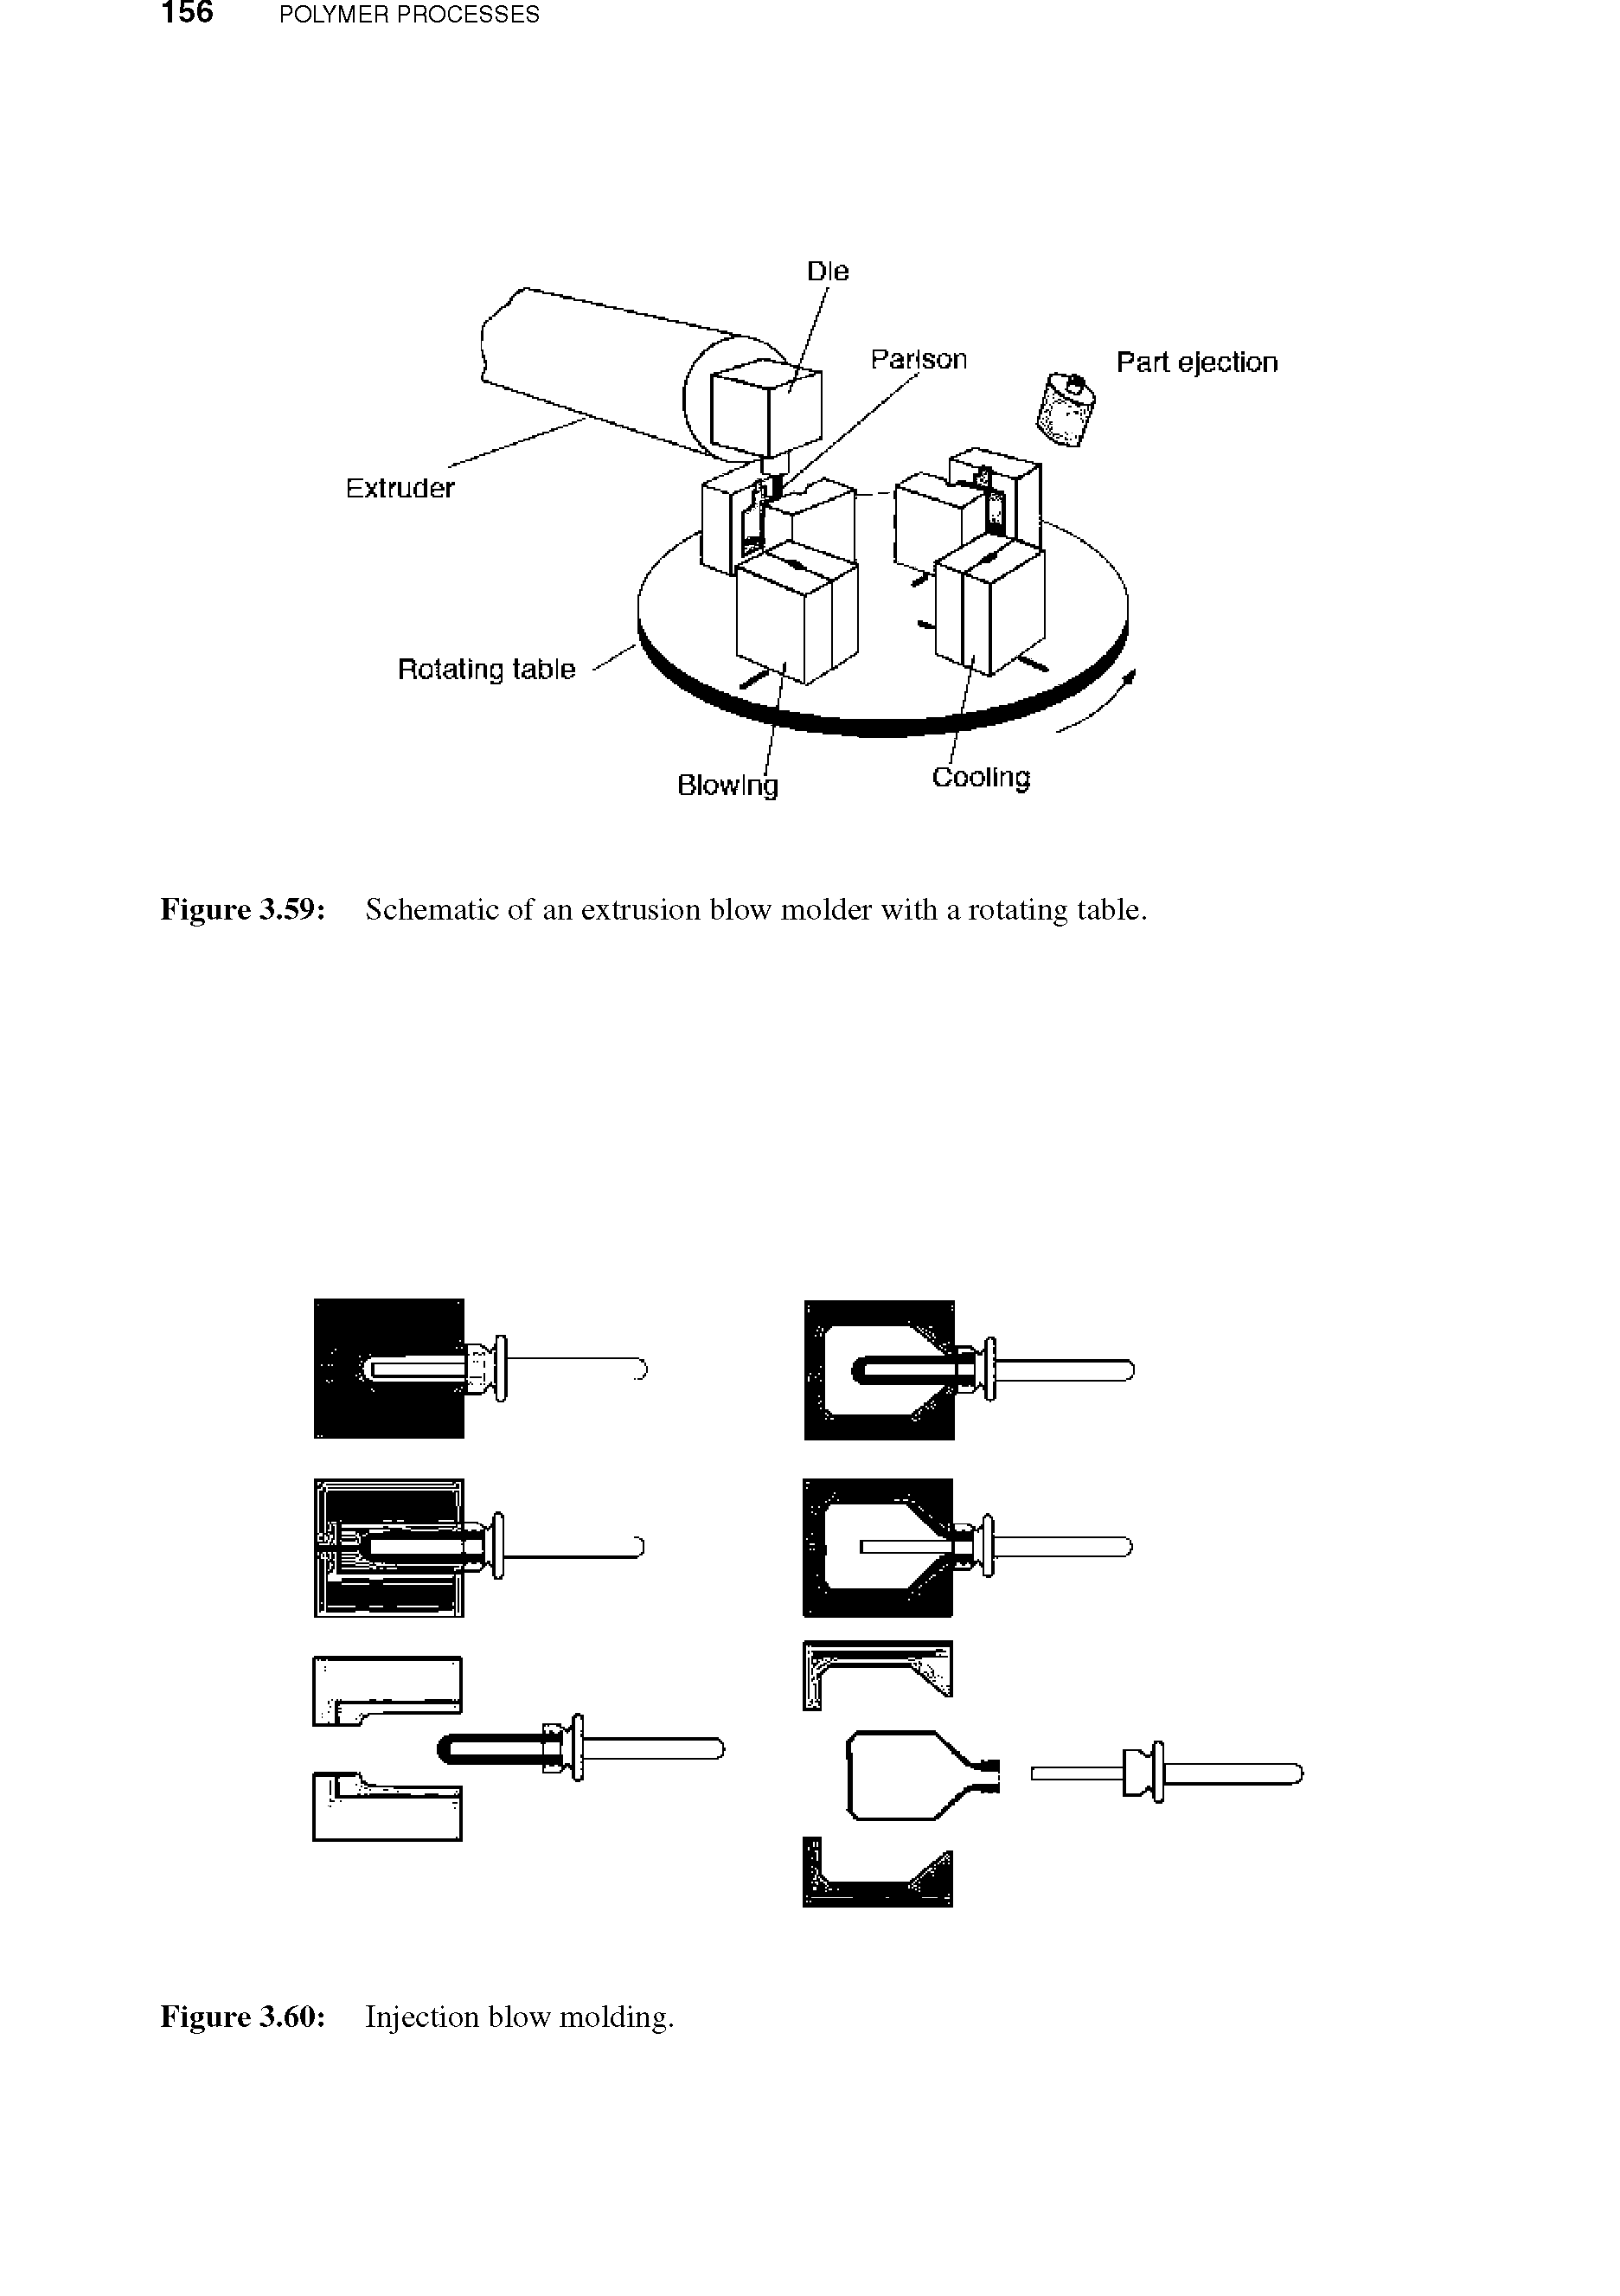 Figure 3.59 Schematic of an extrusion blow molder with a rotating table.